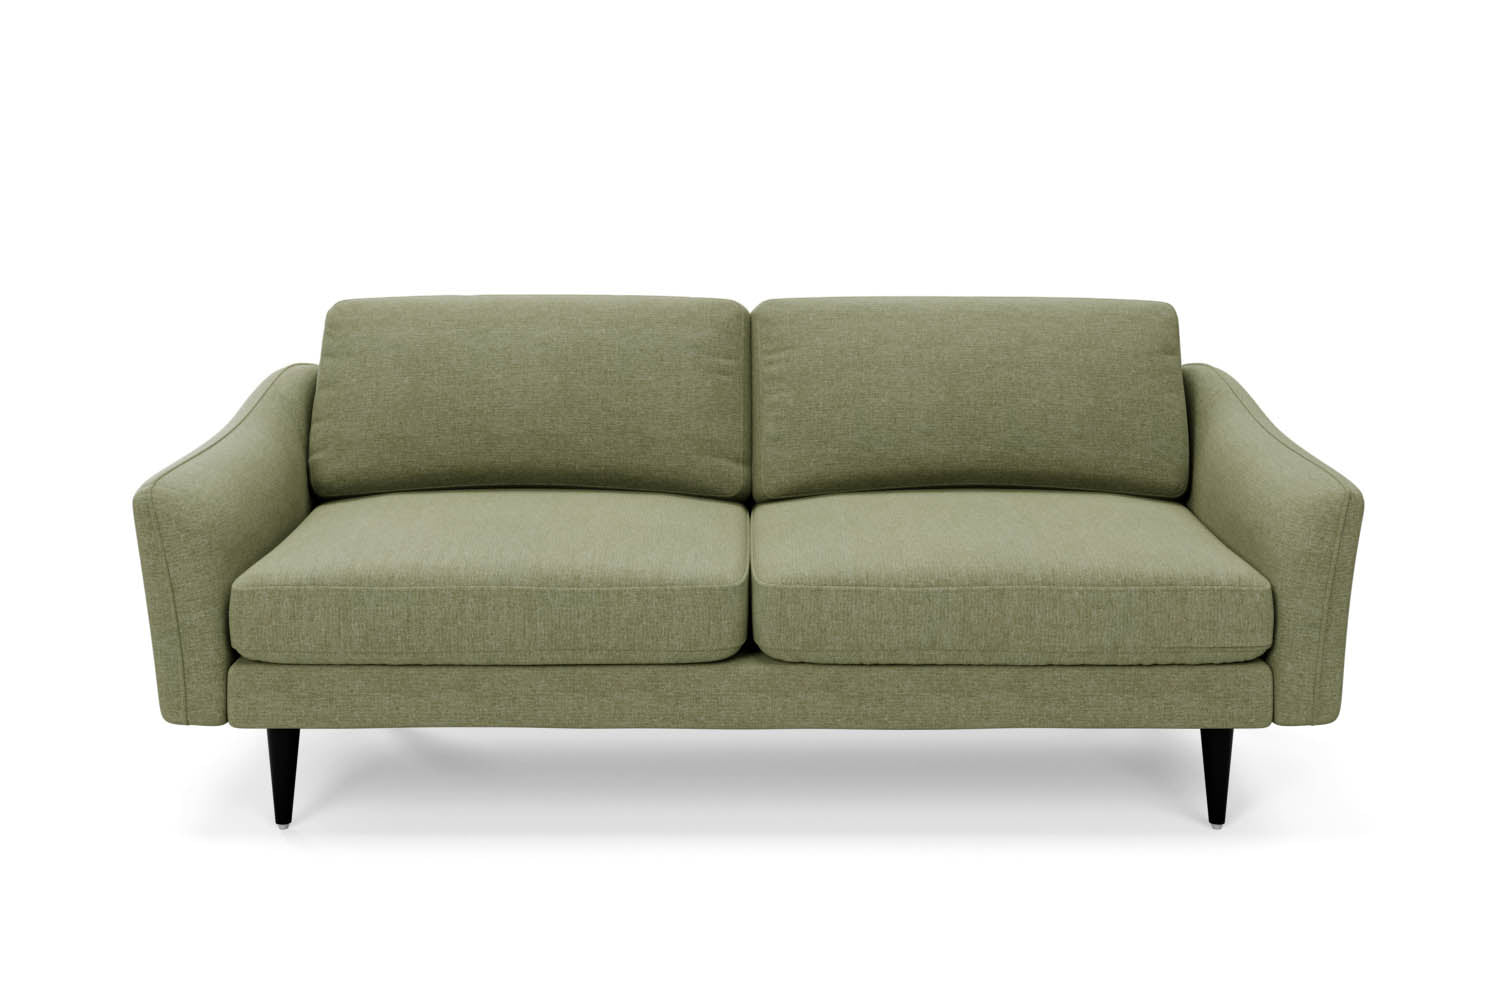 The Rebel 3 Seater Sofa in Sage with black legs front variant_40886317776944